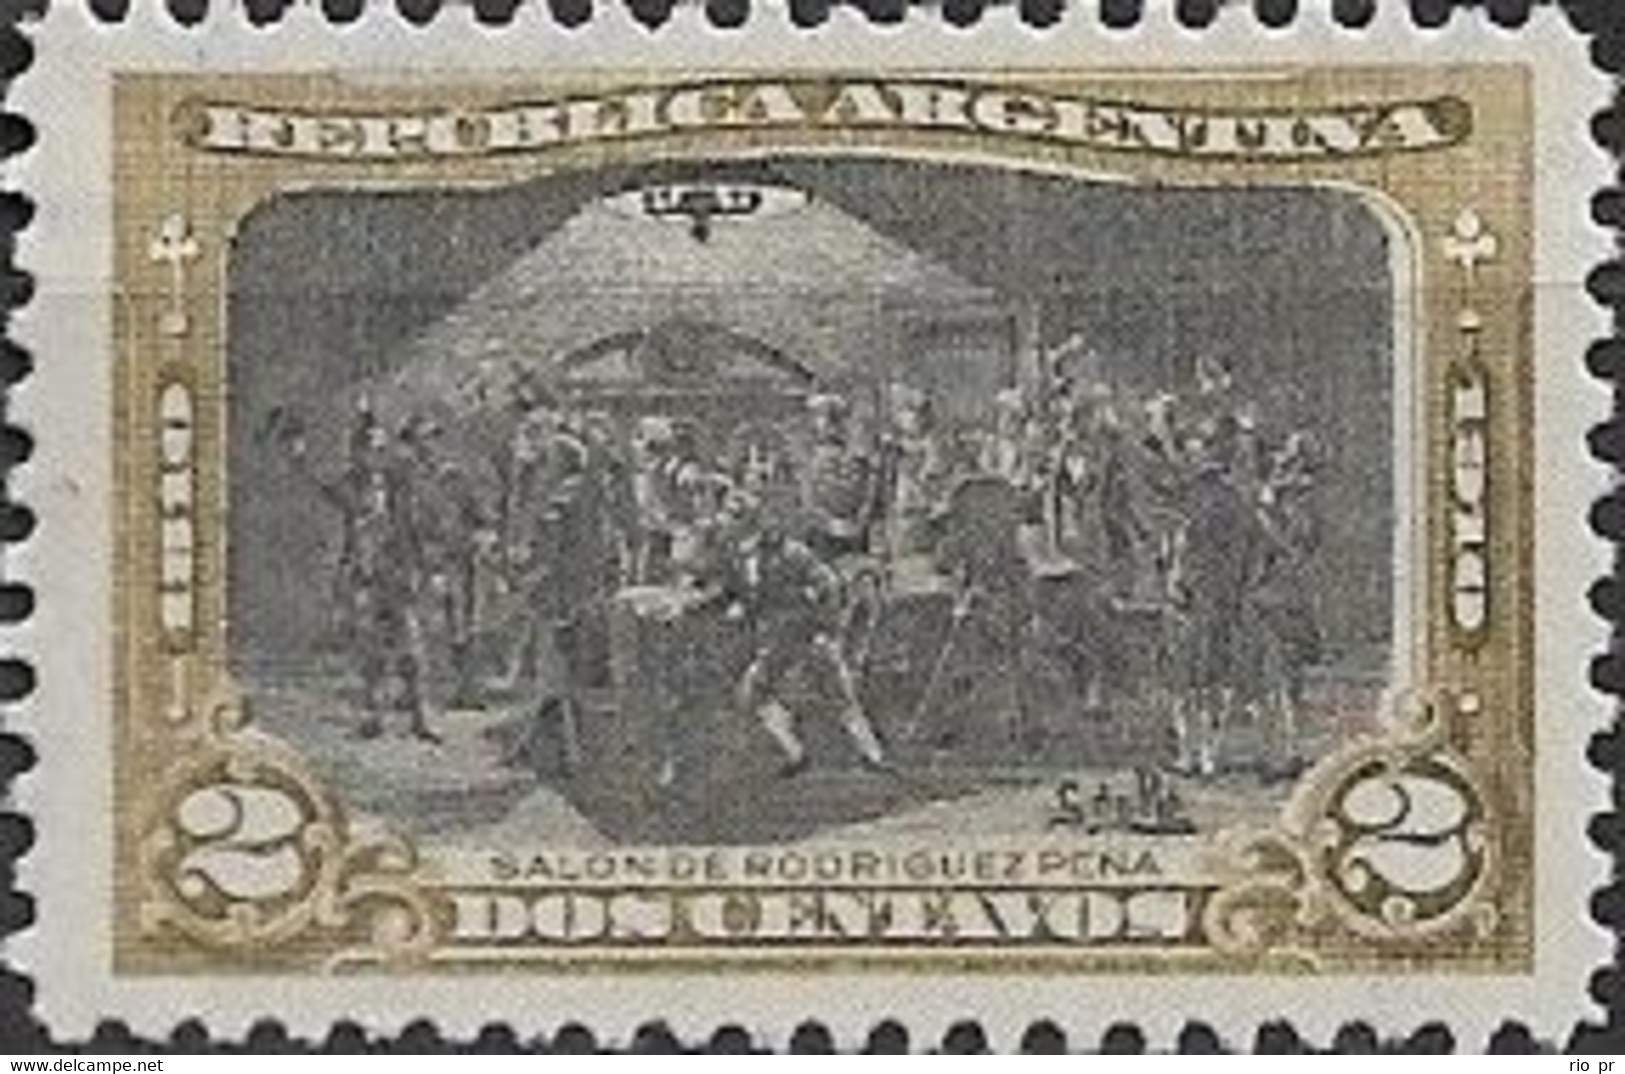 ARGENTINA - CENTENARY OF THE ARGENTINE REPUBLIC (MEETING AT PEÑA'S HOME, 2 C) 1910 - MNH - Nuevos